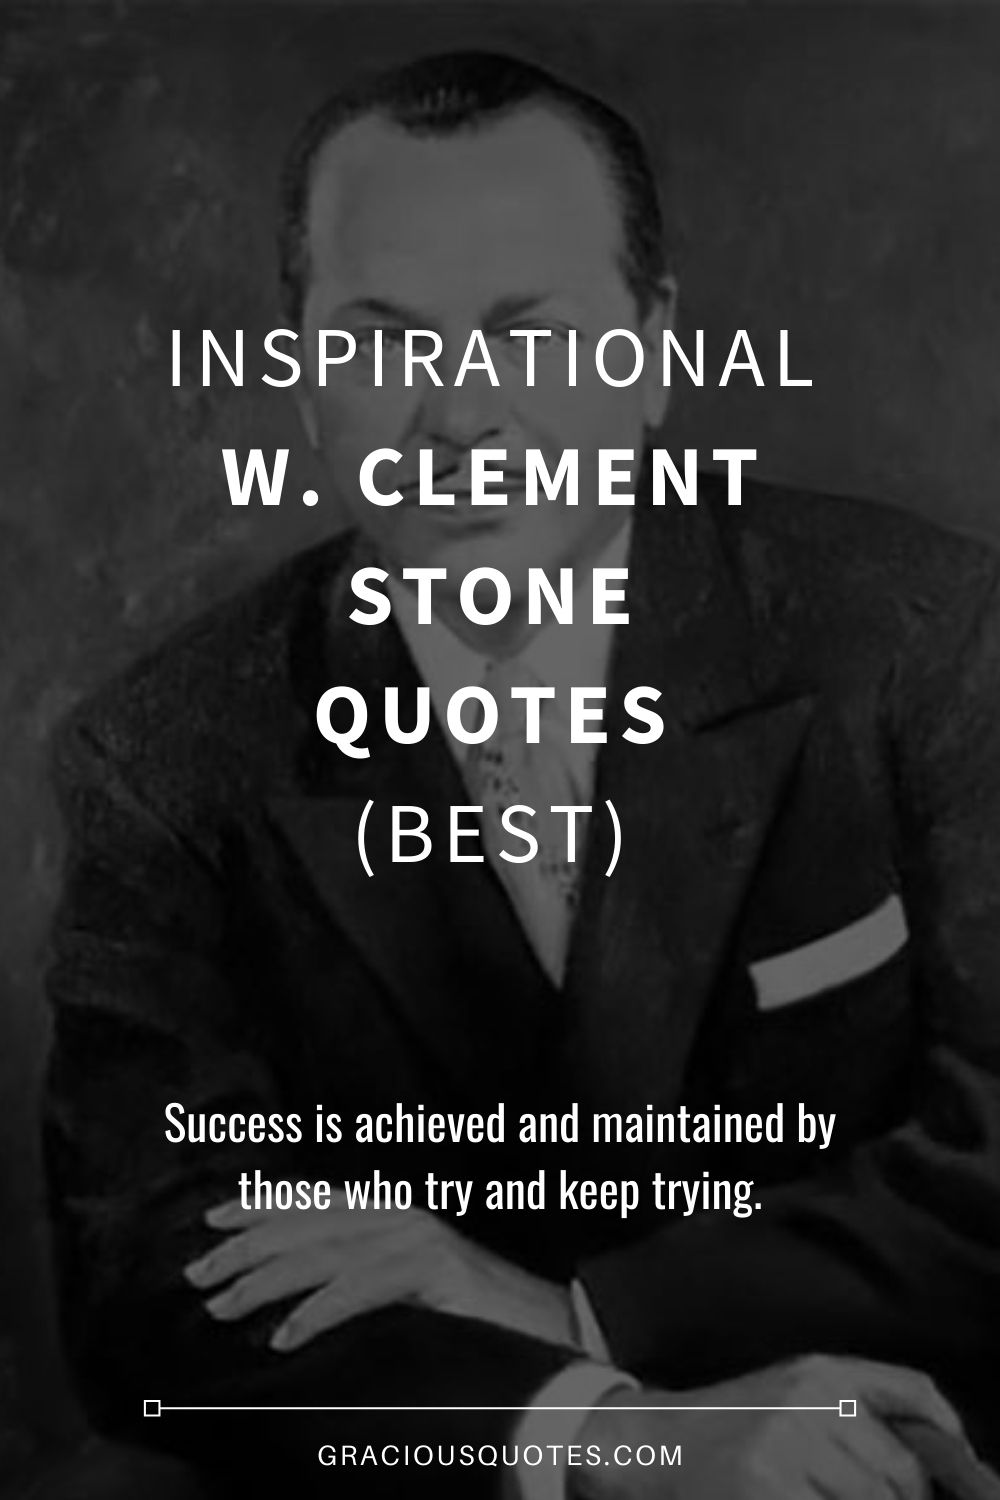 Inspirational W. Clement Stone Quotes (BEST) - Gracious Quotes